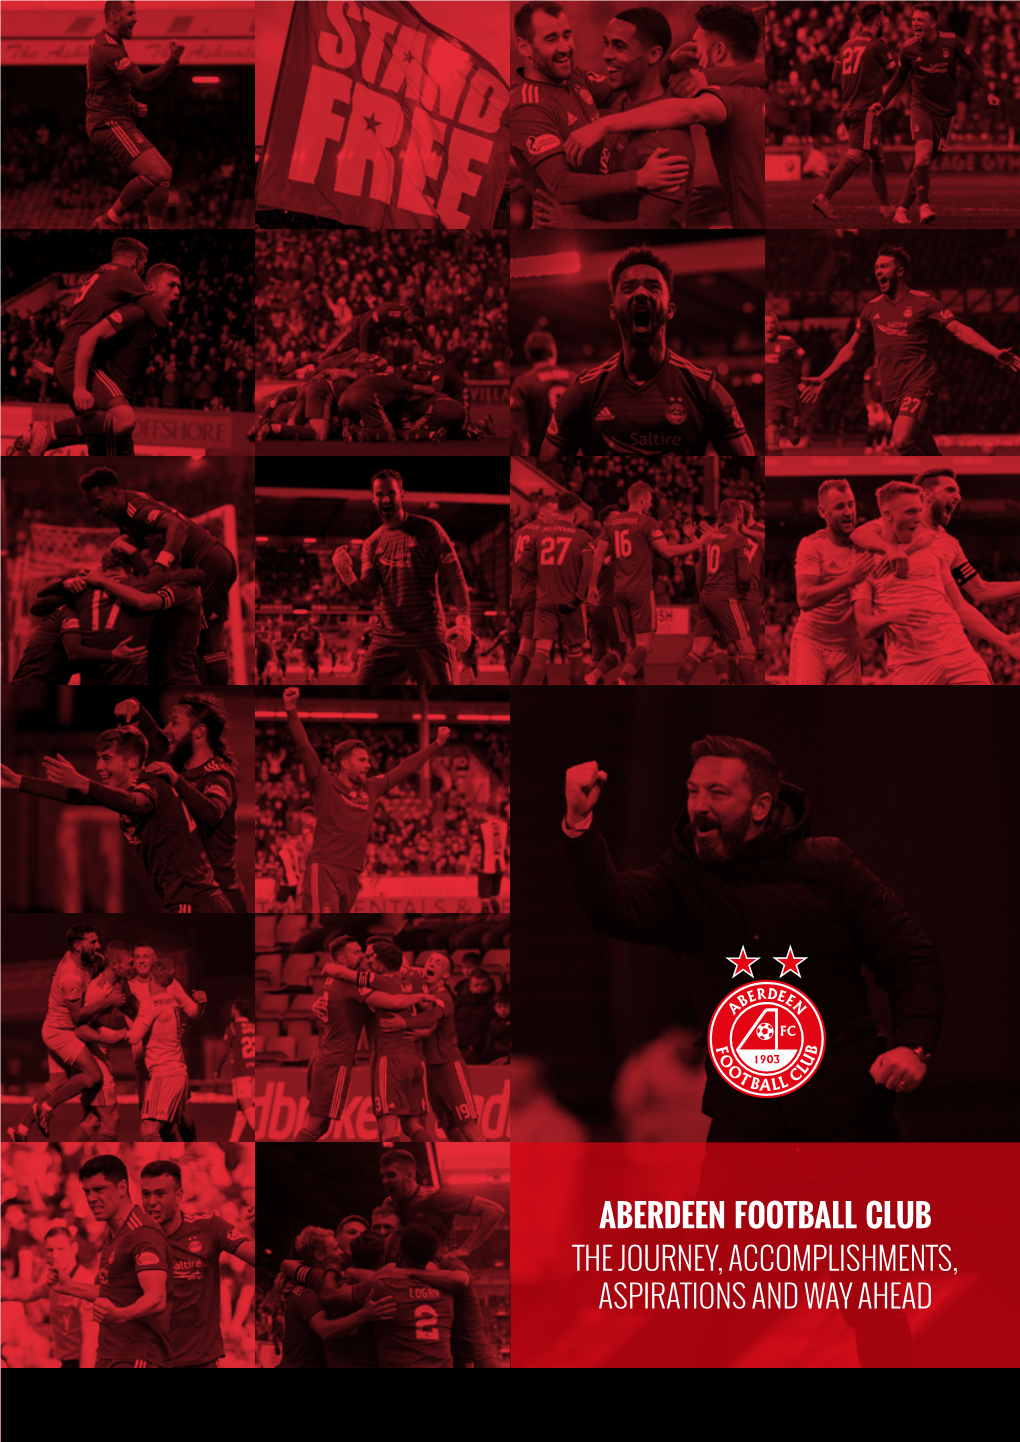 Aberdeen Football Club the Journey, Accomplishments, Aspirations and Way Ahead This Message Comes from Everyone at the Club